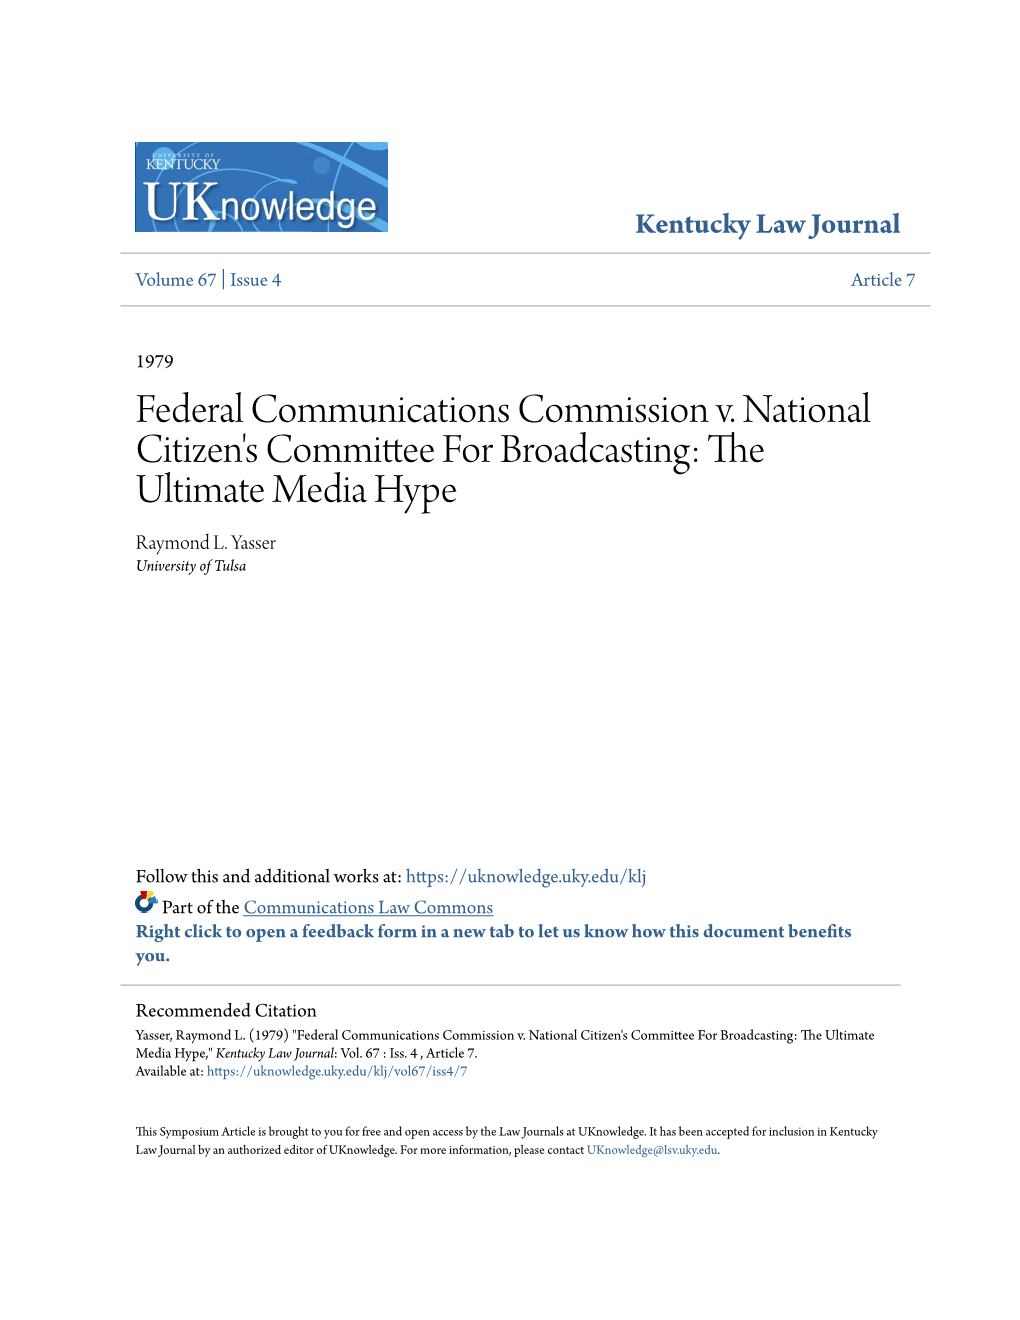 Federal Communications Commission V. National Citizen's Committee for Broadcasting: the Ultimate Media Hype Raymond L